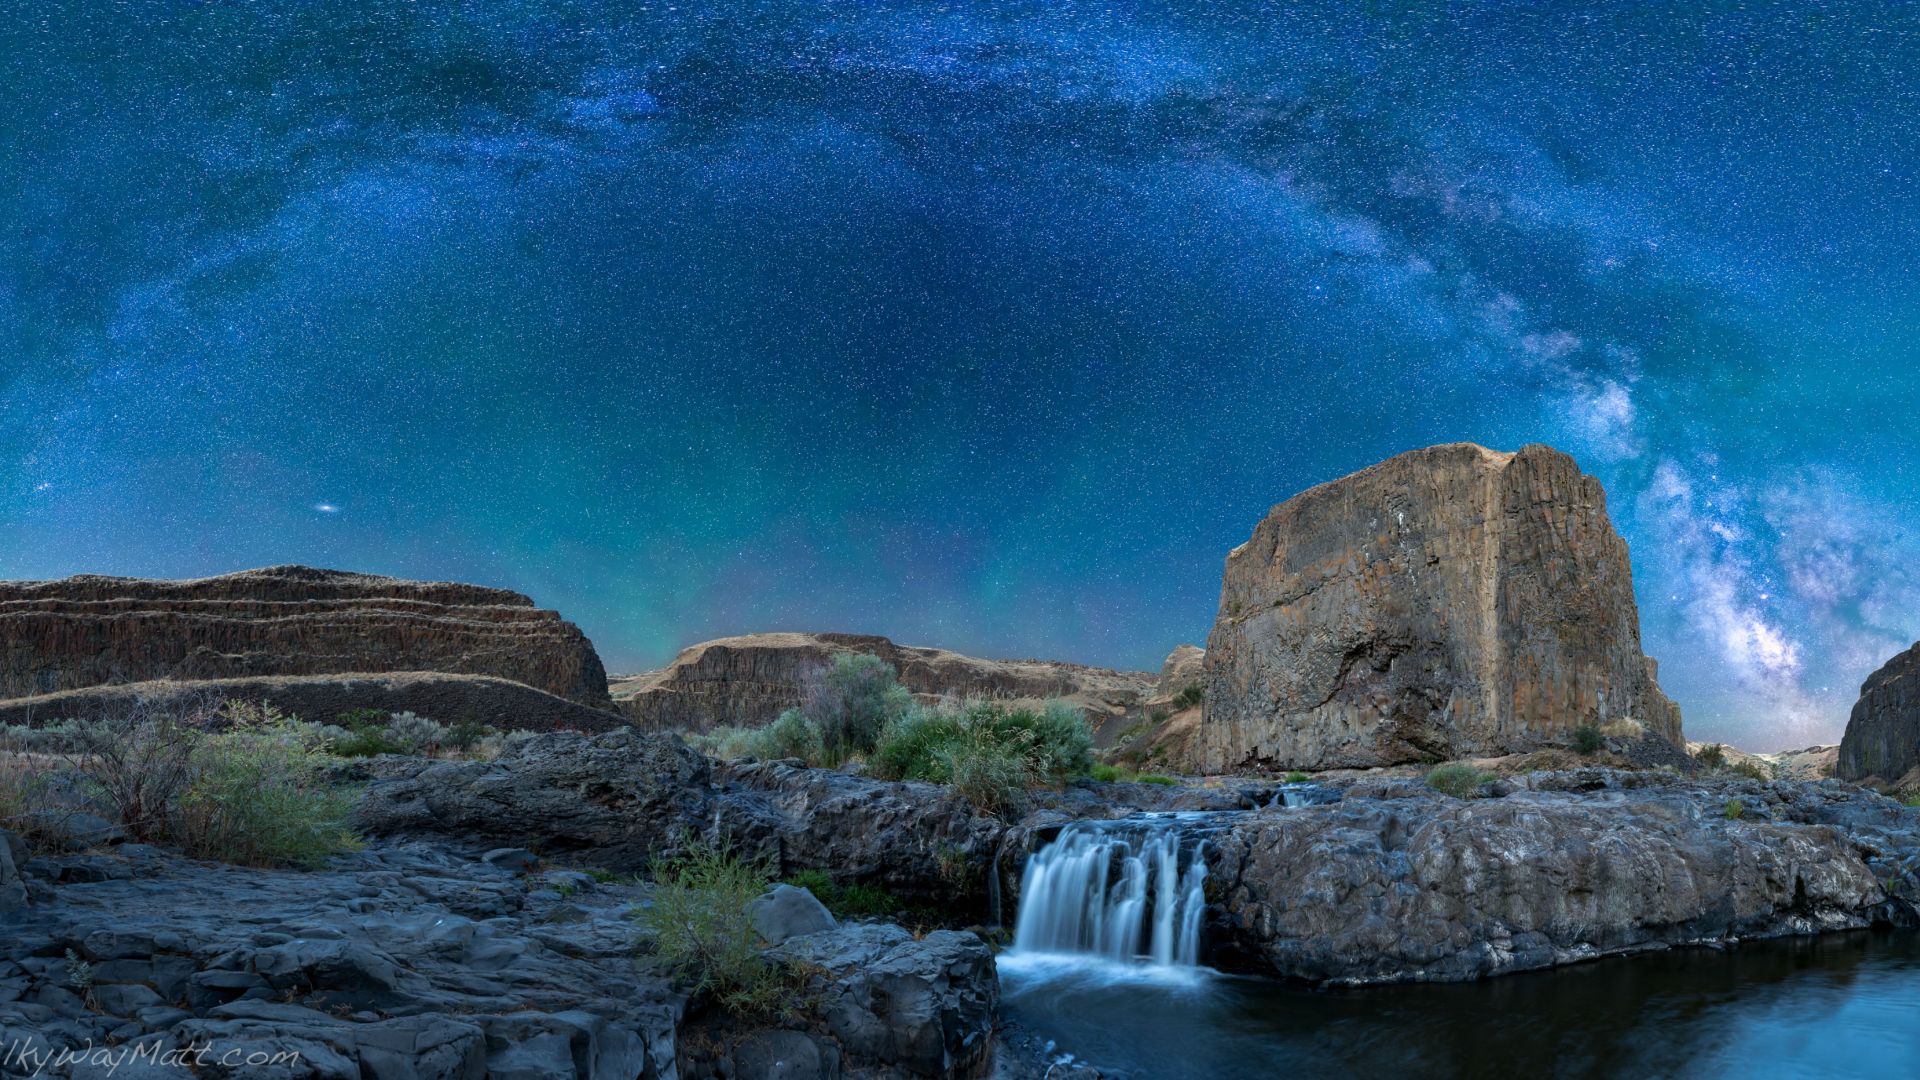 Wallpaper Milky way galaxy, mountains, night and waterfall